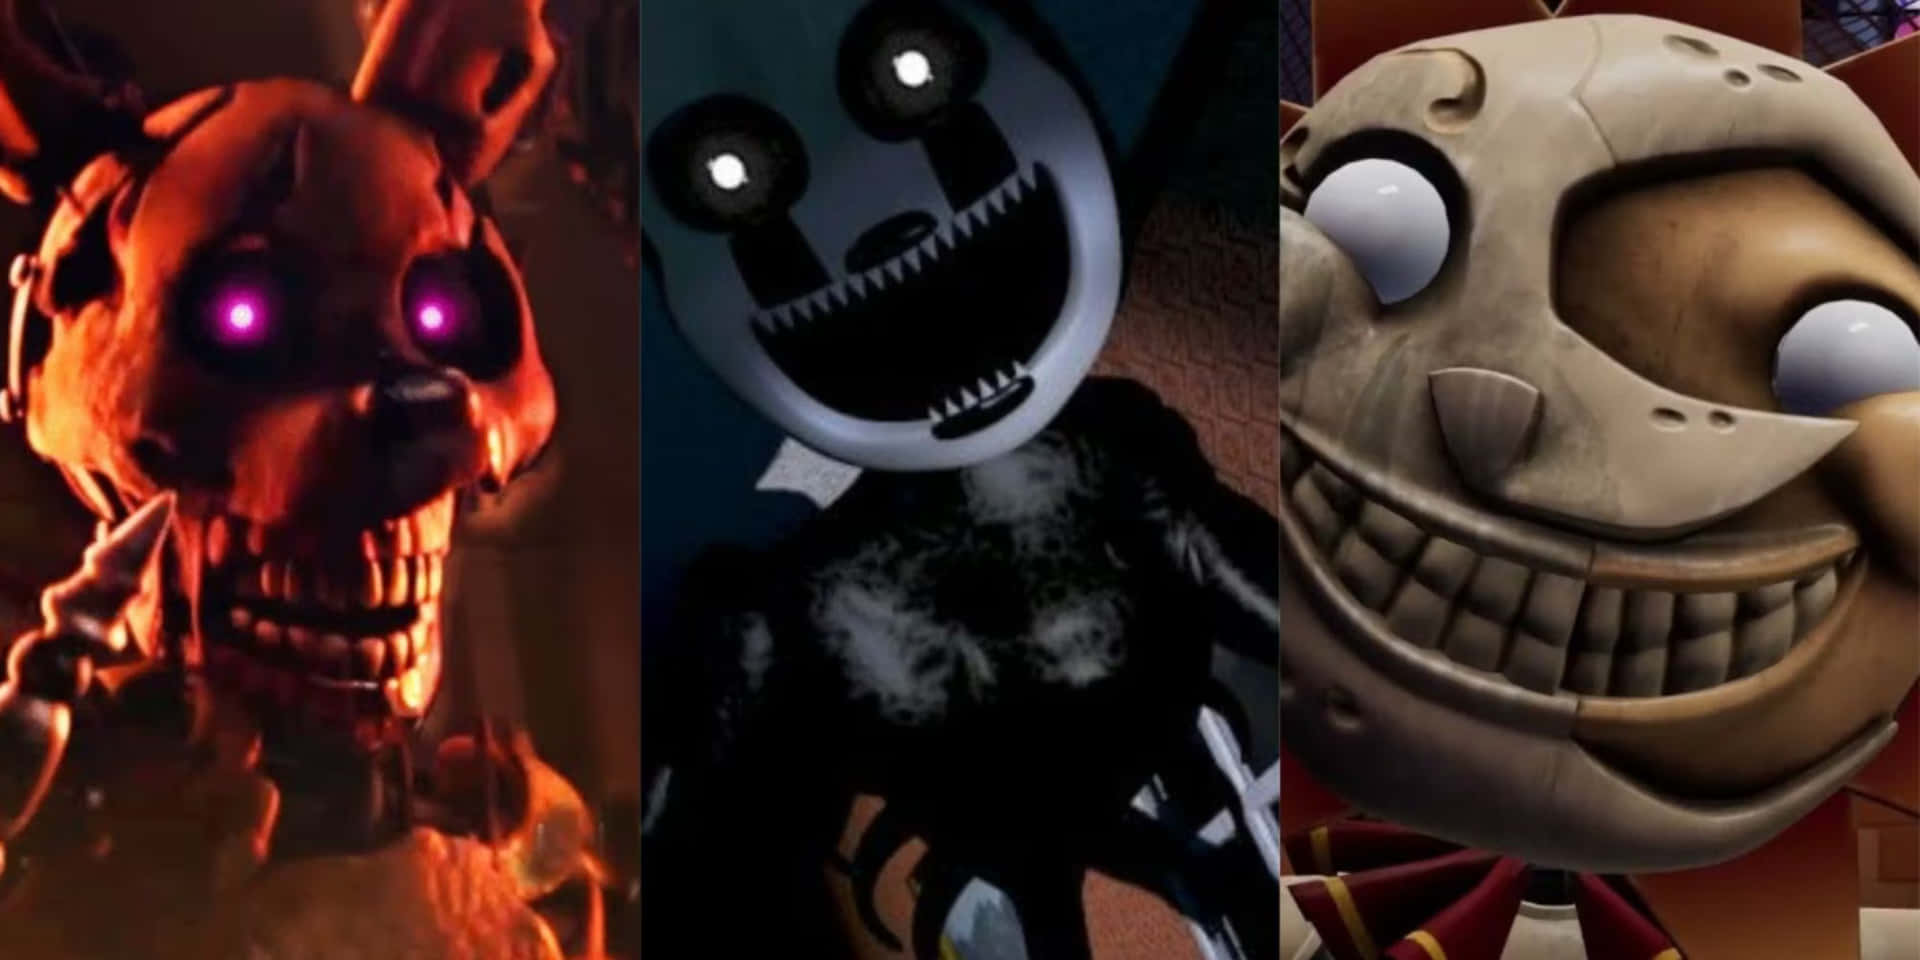 Creepy Fnaf The Glitched Attraction Pictures